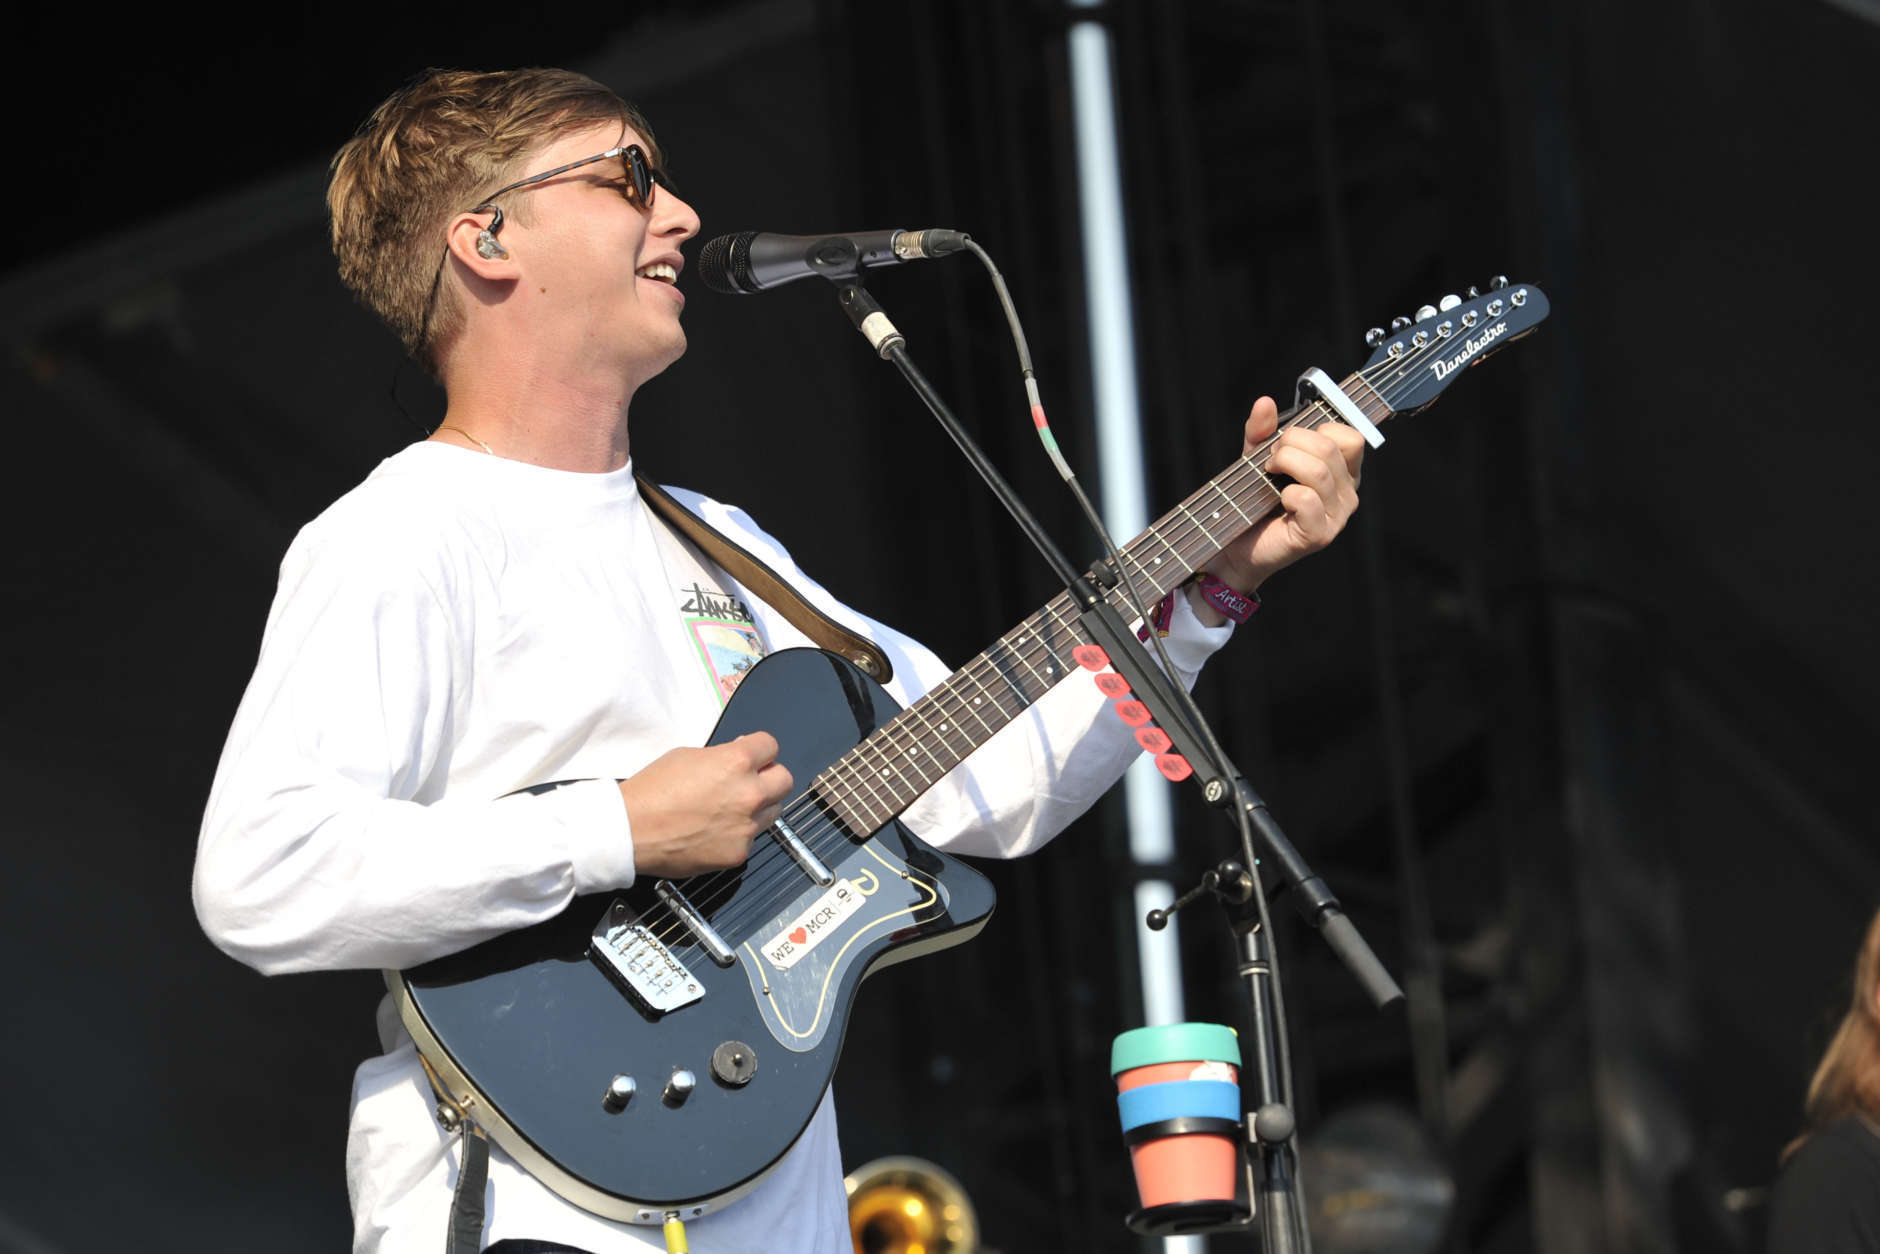 George Ezra performs on day one at Lollapalooza in Grant Park on Thursday, Aug 3, 2017 in Chicago. (Photo by Rob Grabowski/Invision/AP)